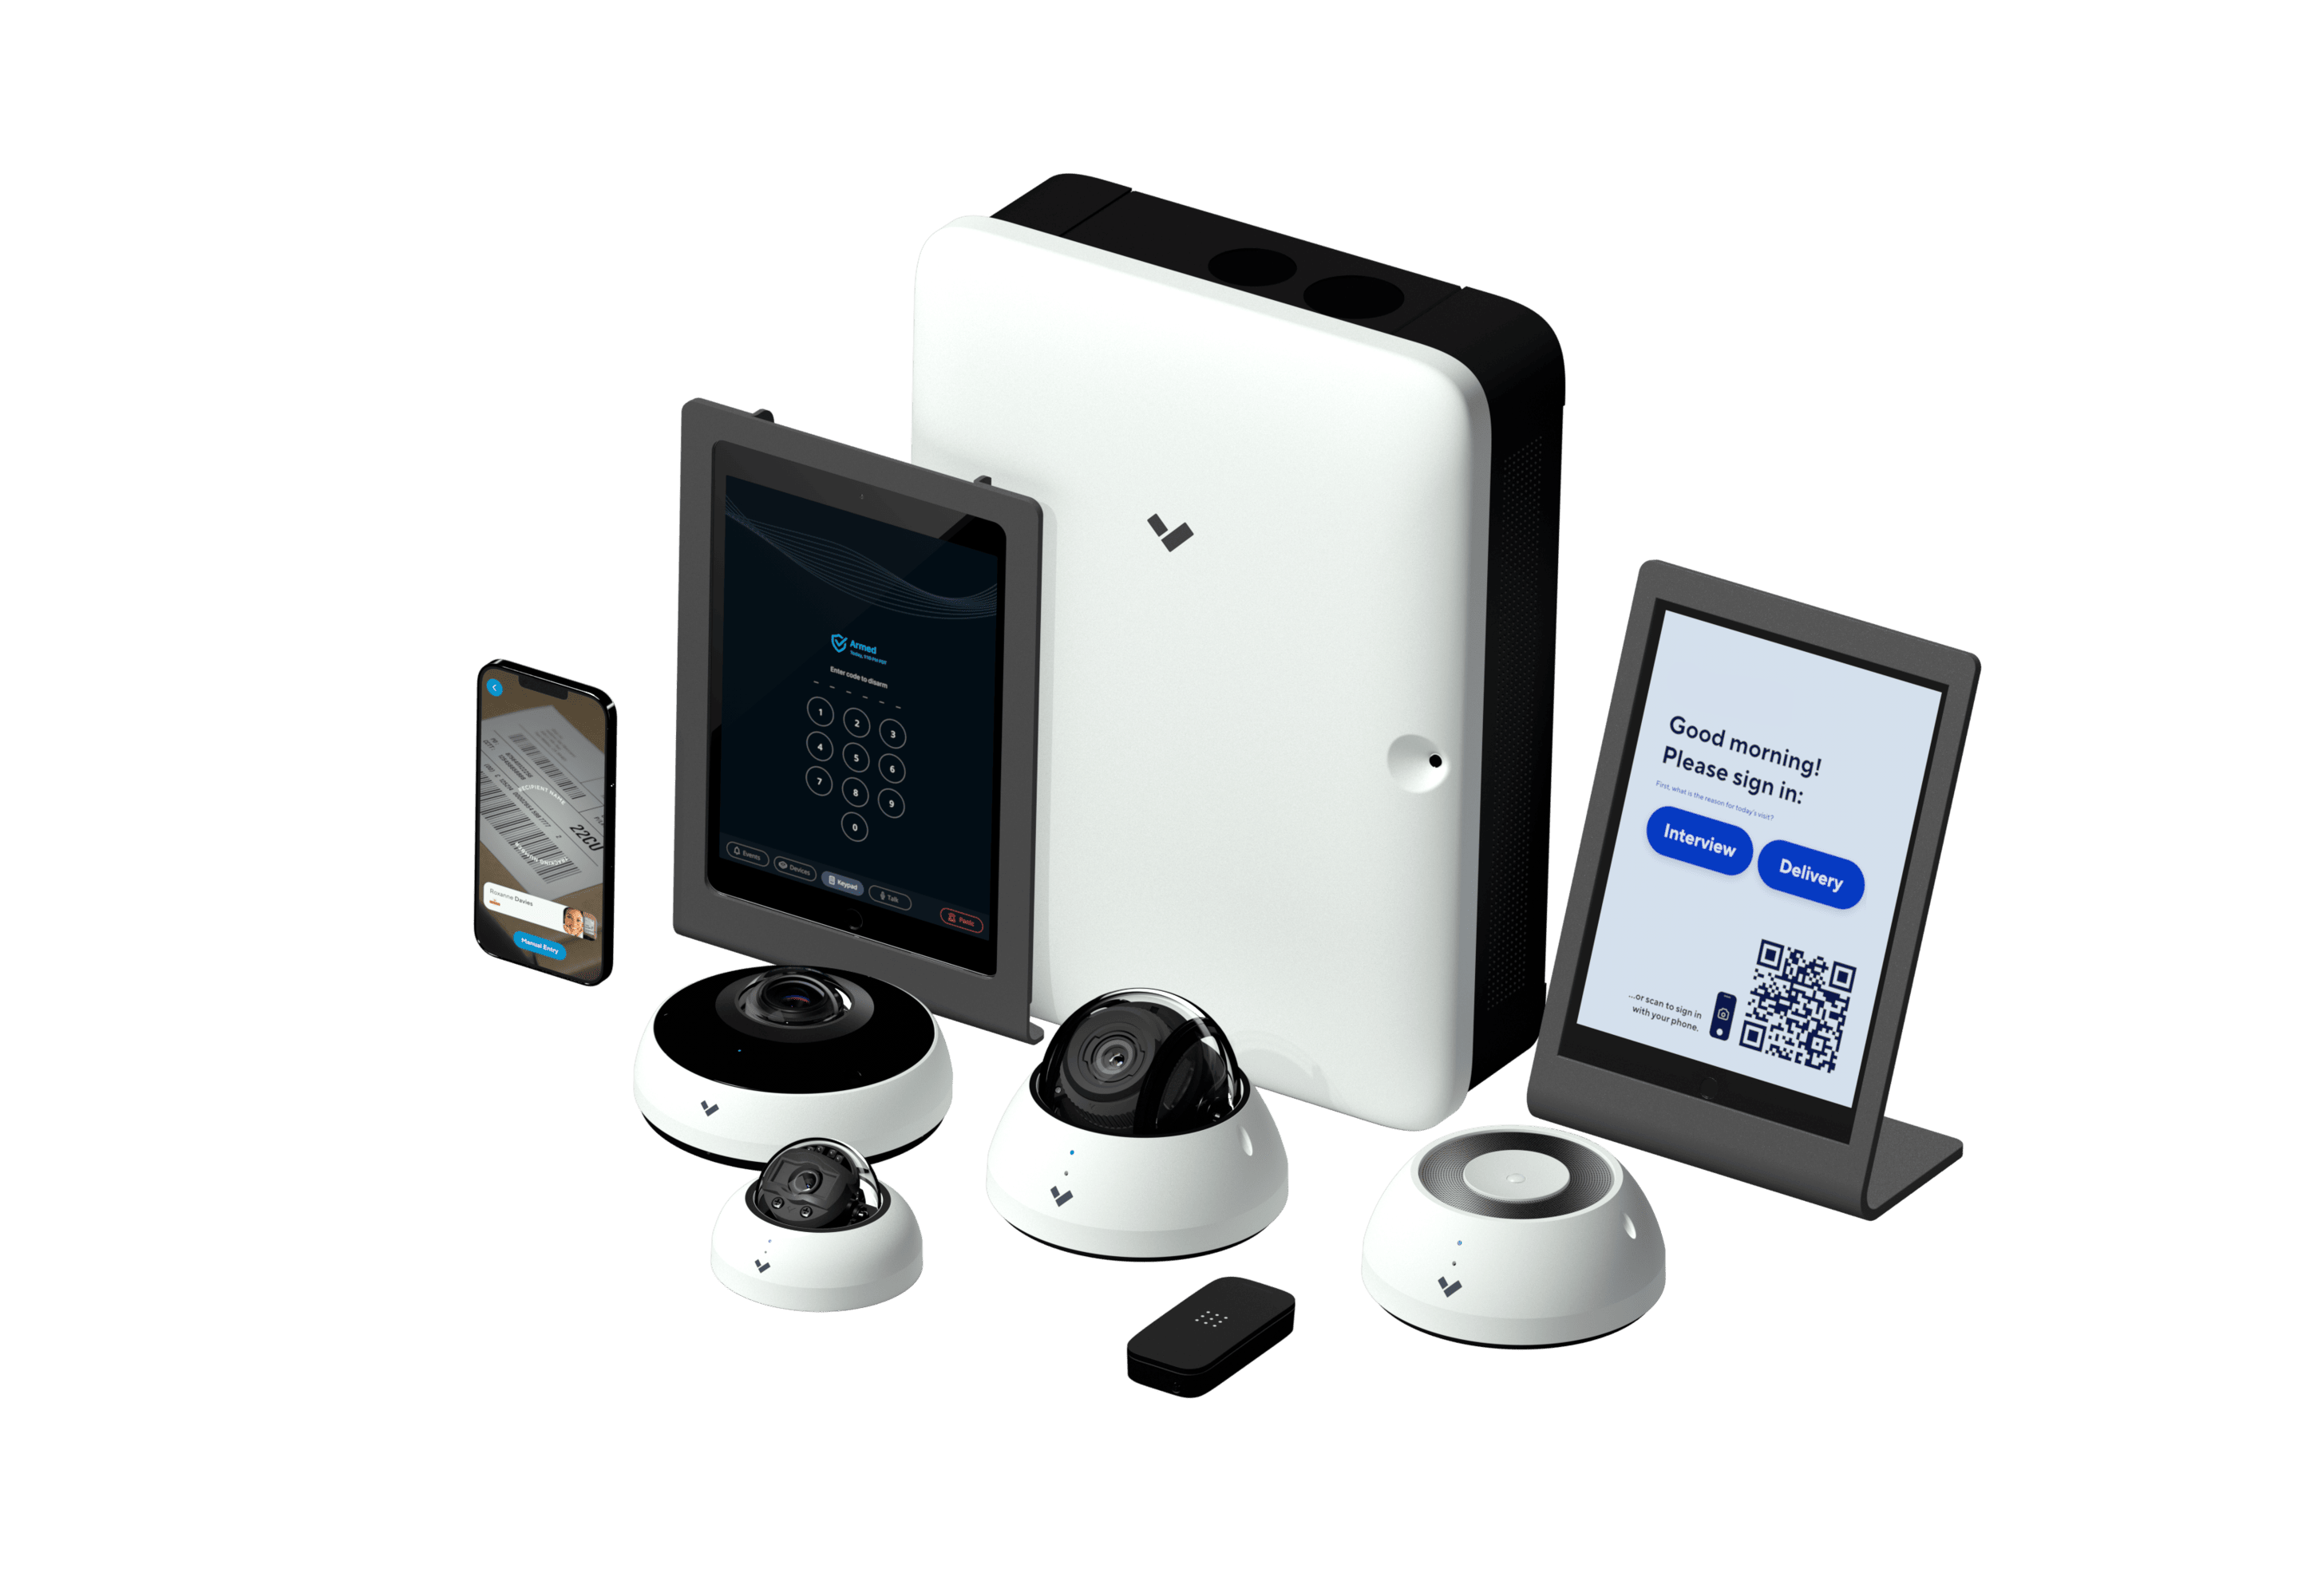 Verkada devices including security cameras with cloud storage